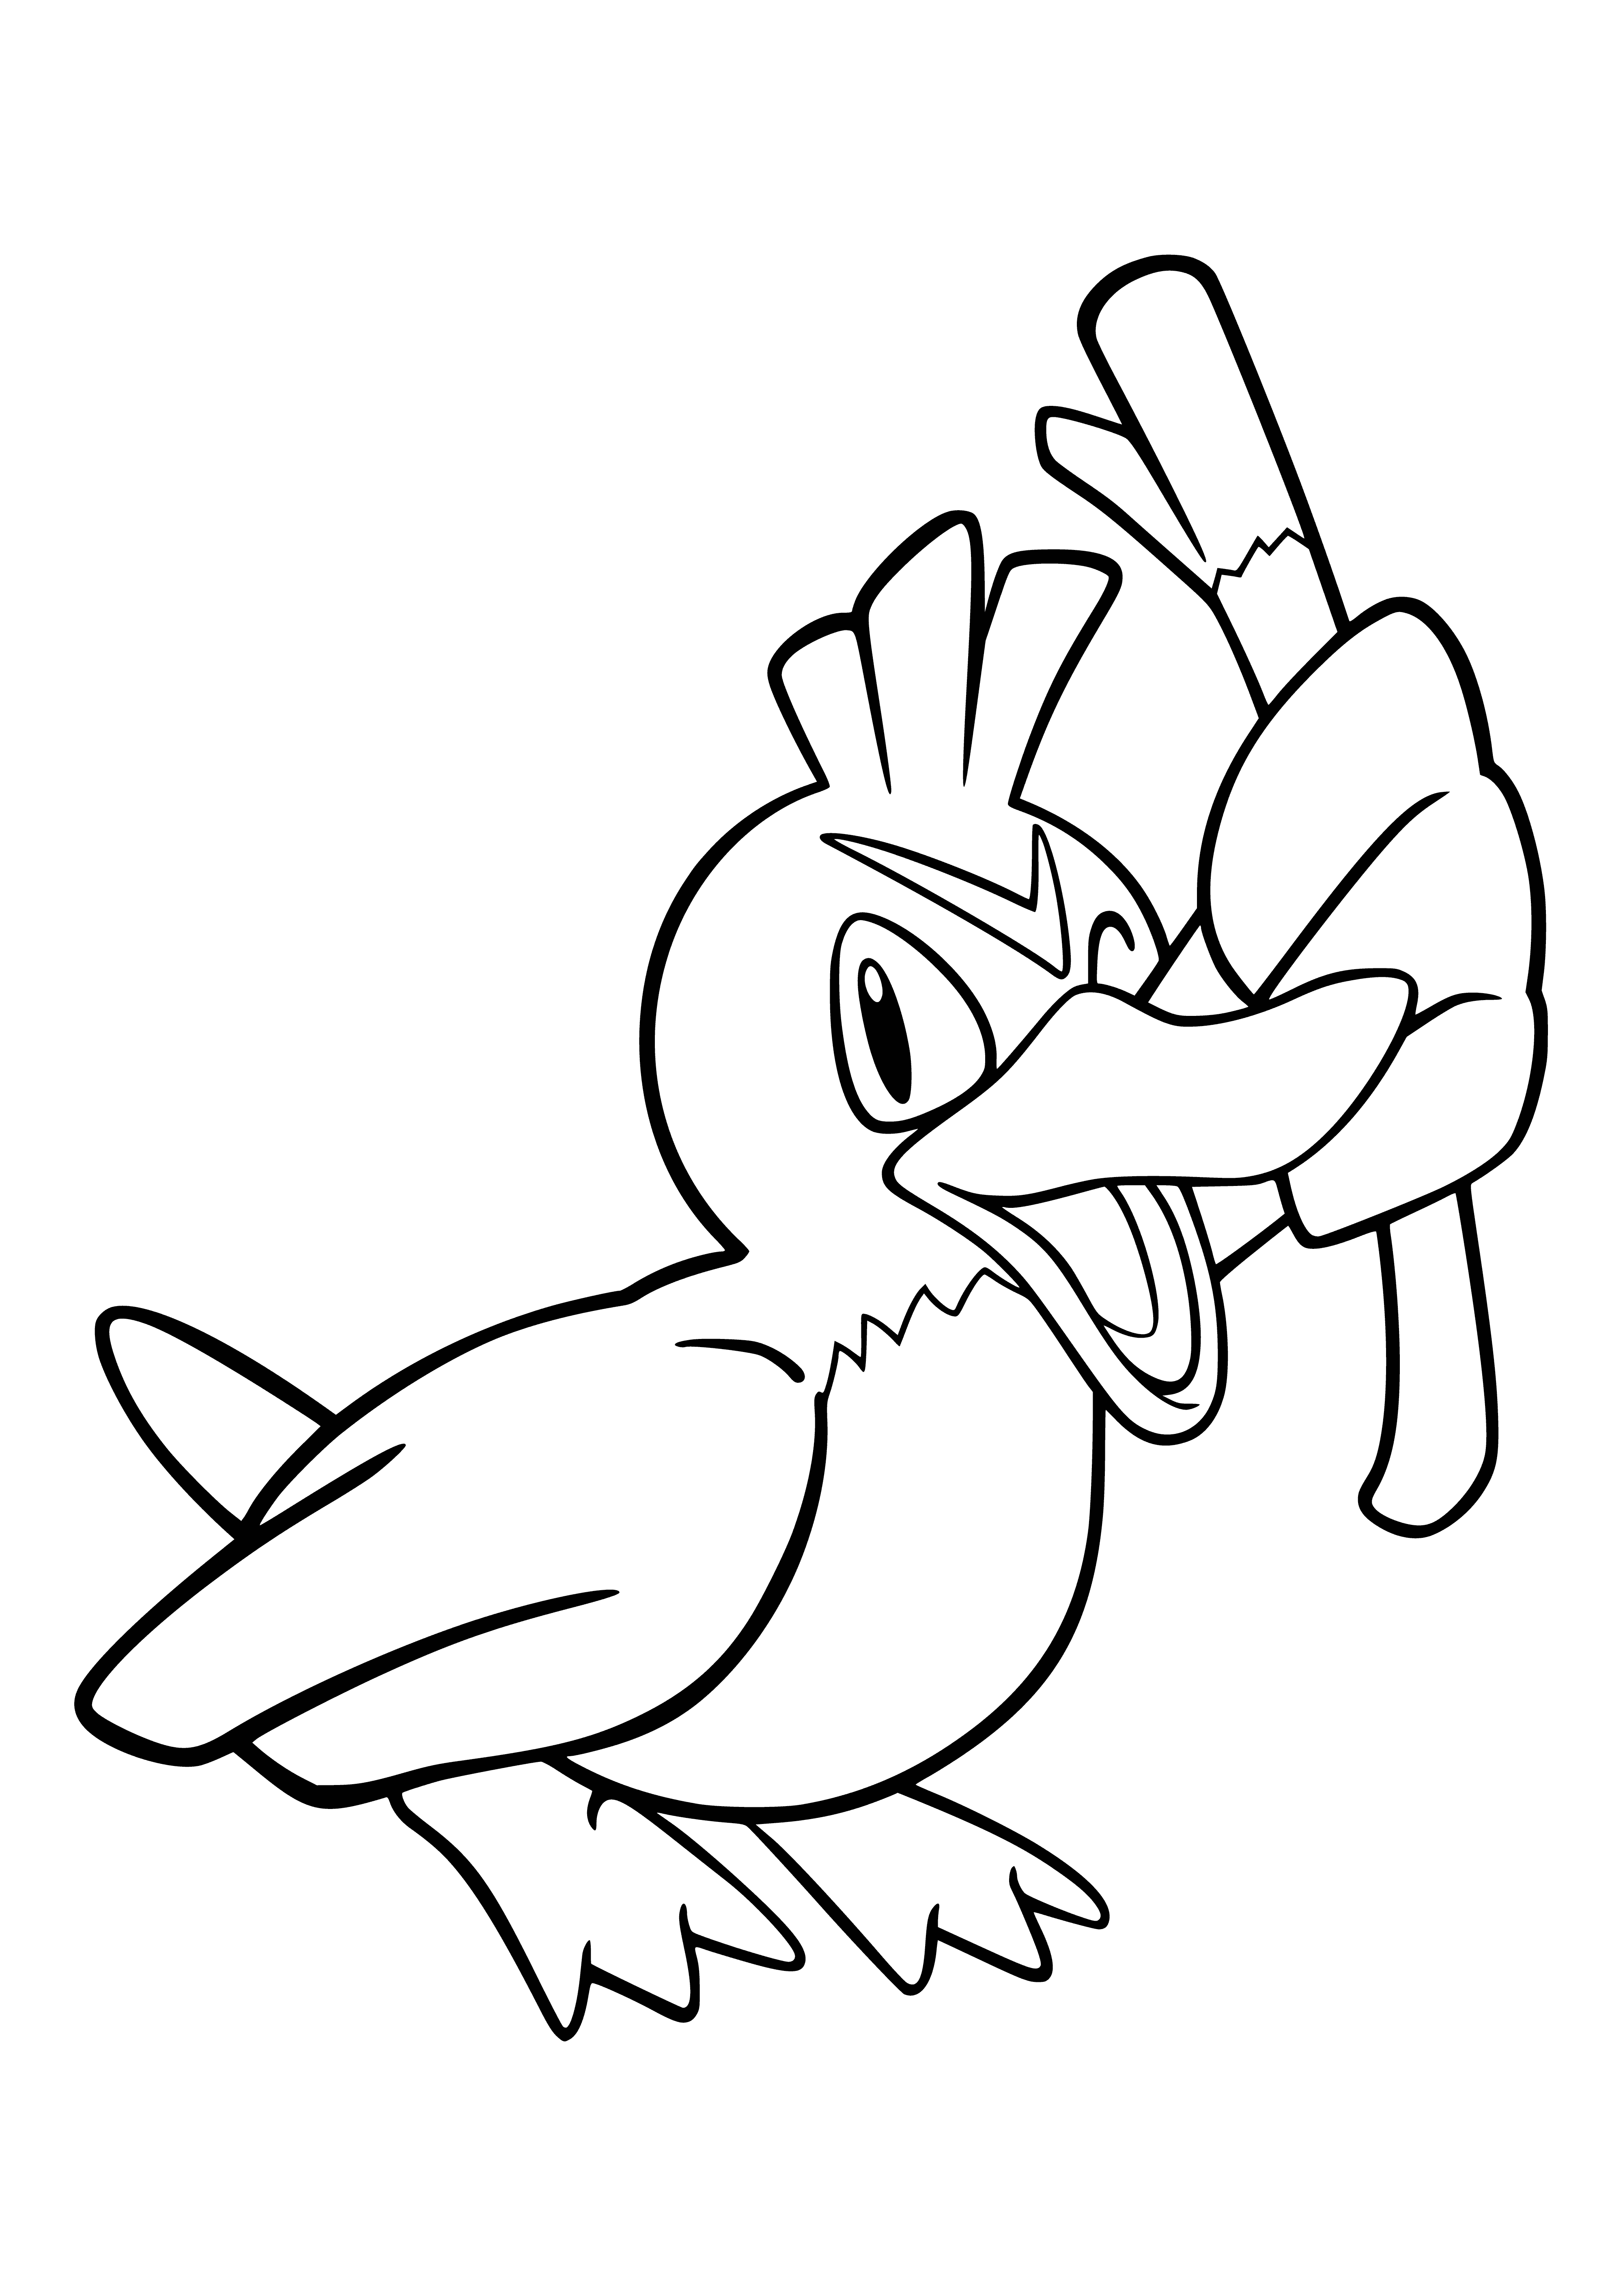 coloring page: Farfetch'd is a small, brown and white Pokémon with a big beak, long neck, small wings and a brown, white feathery tail. #Pokémon